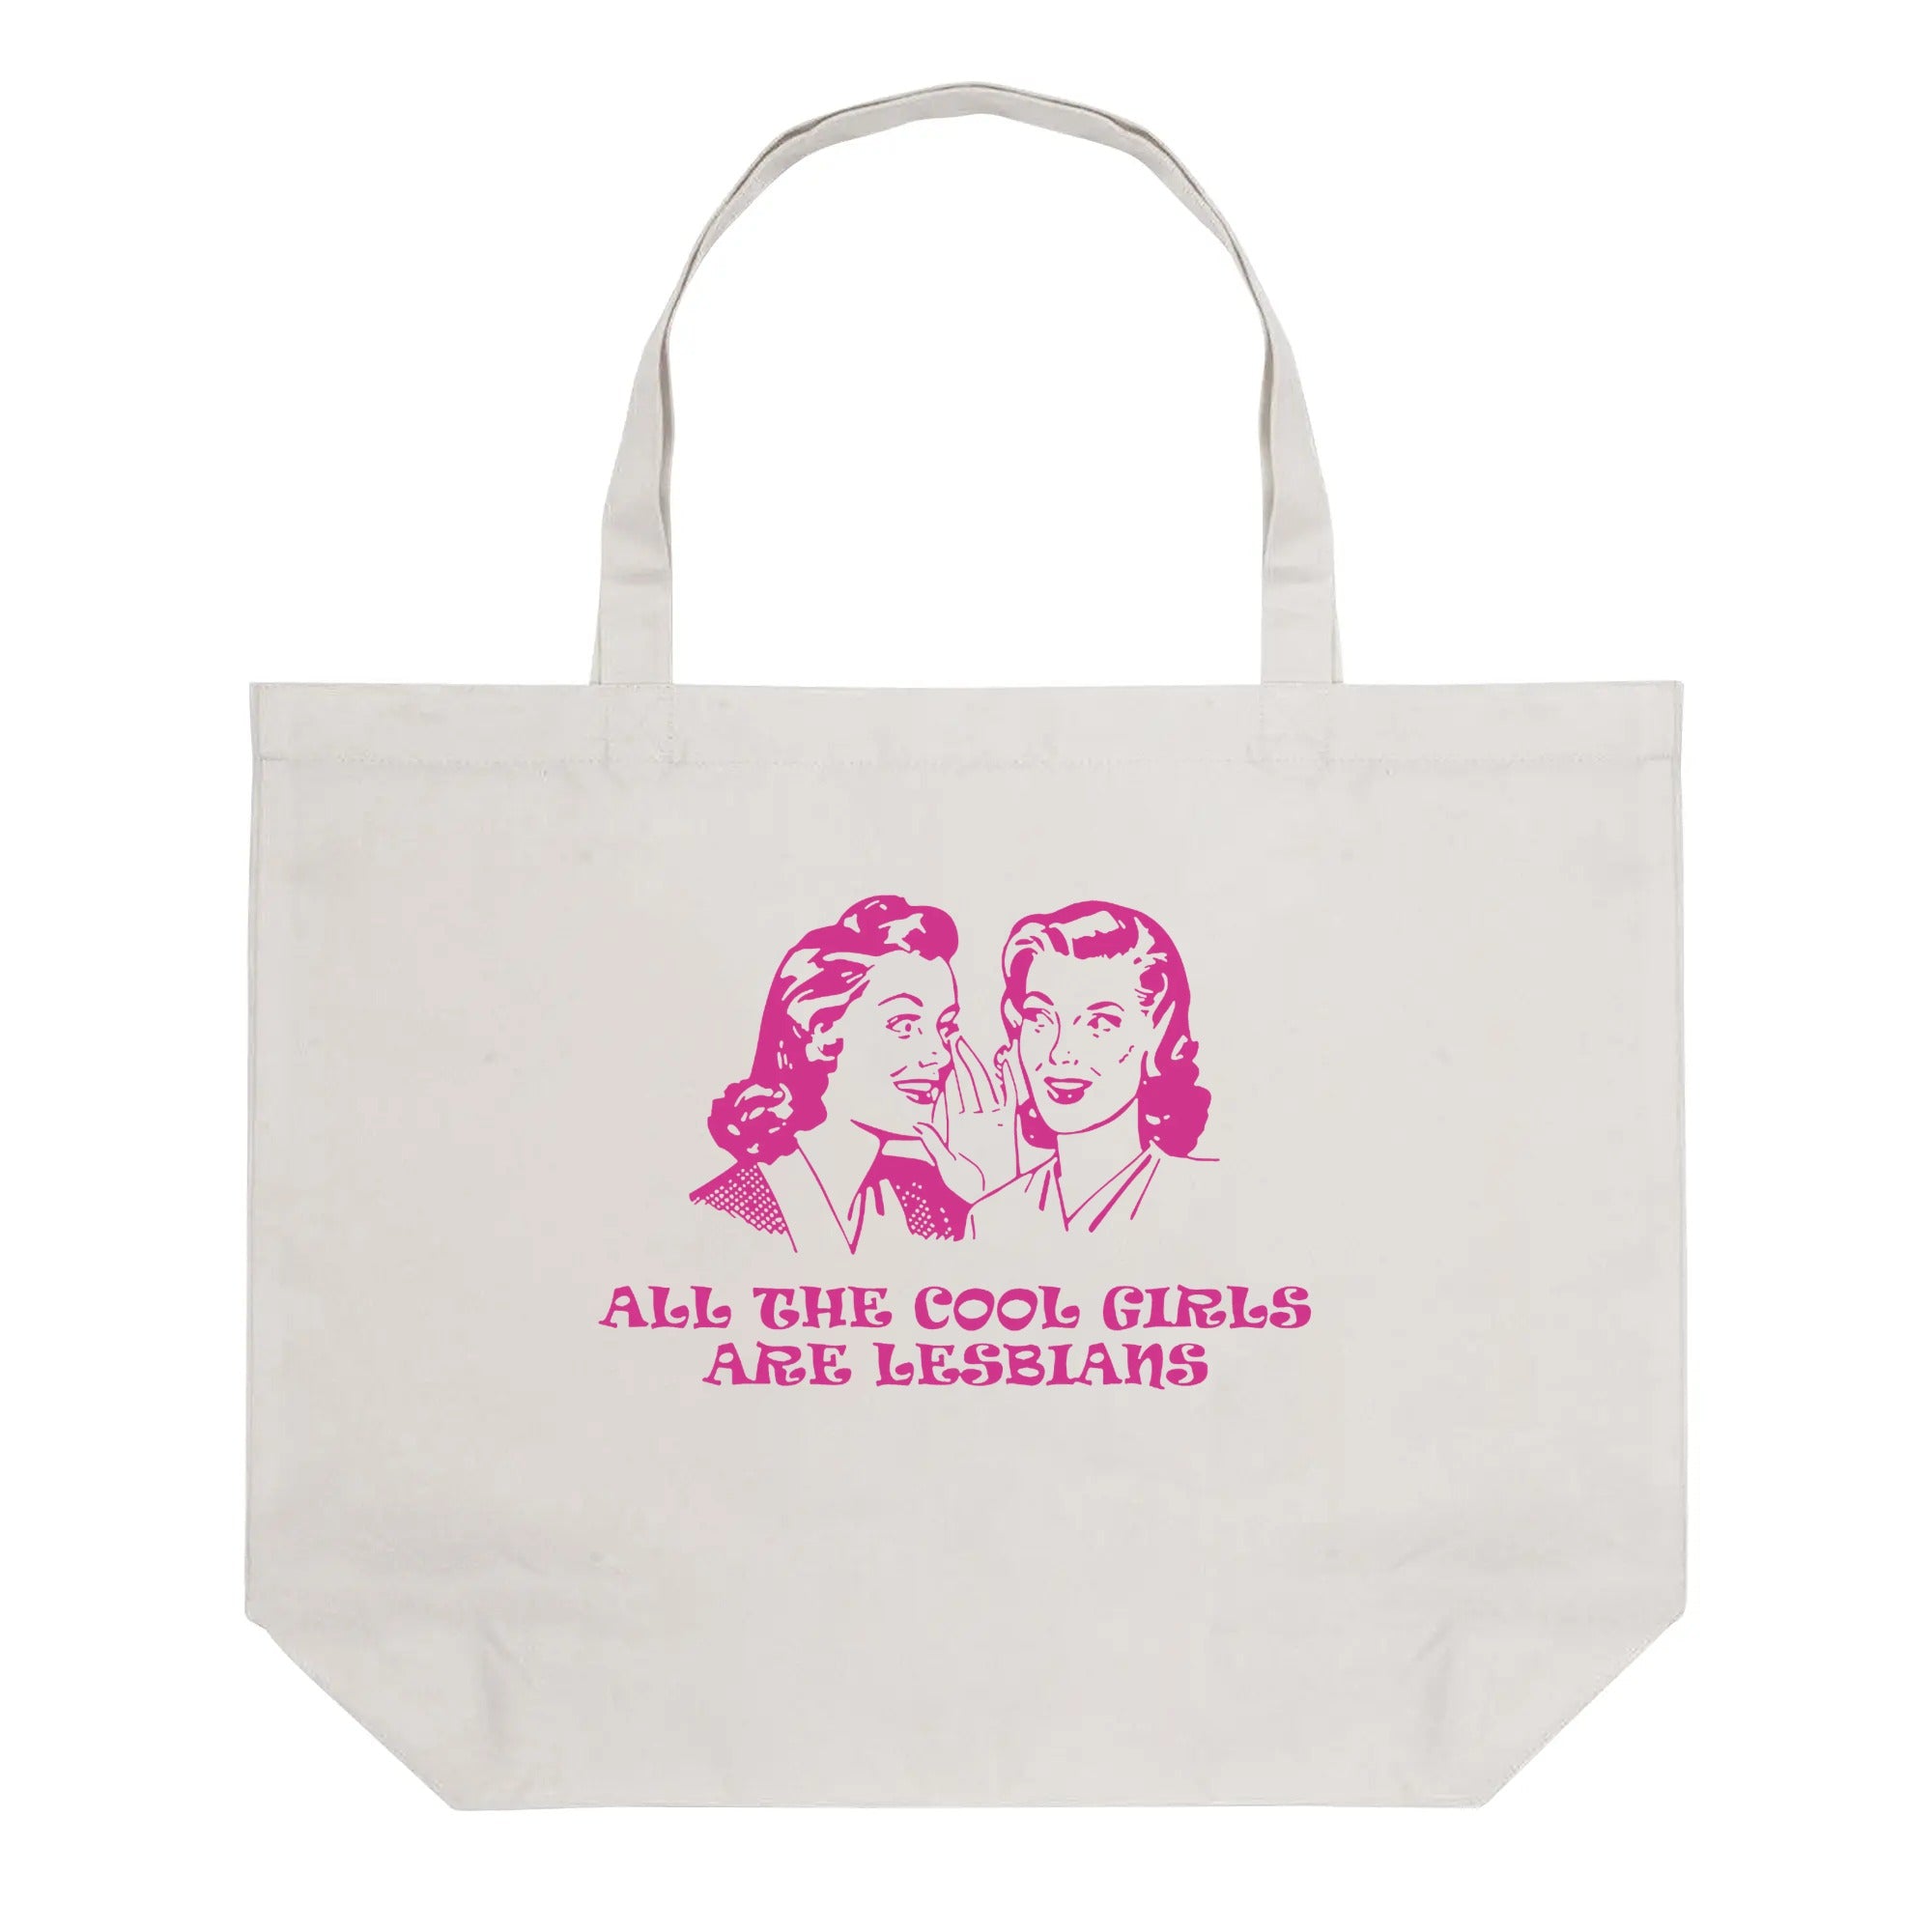 All the Cool Girls are Lesbians Tote Bag